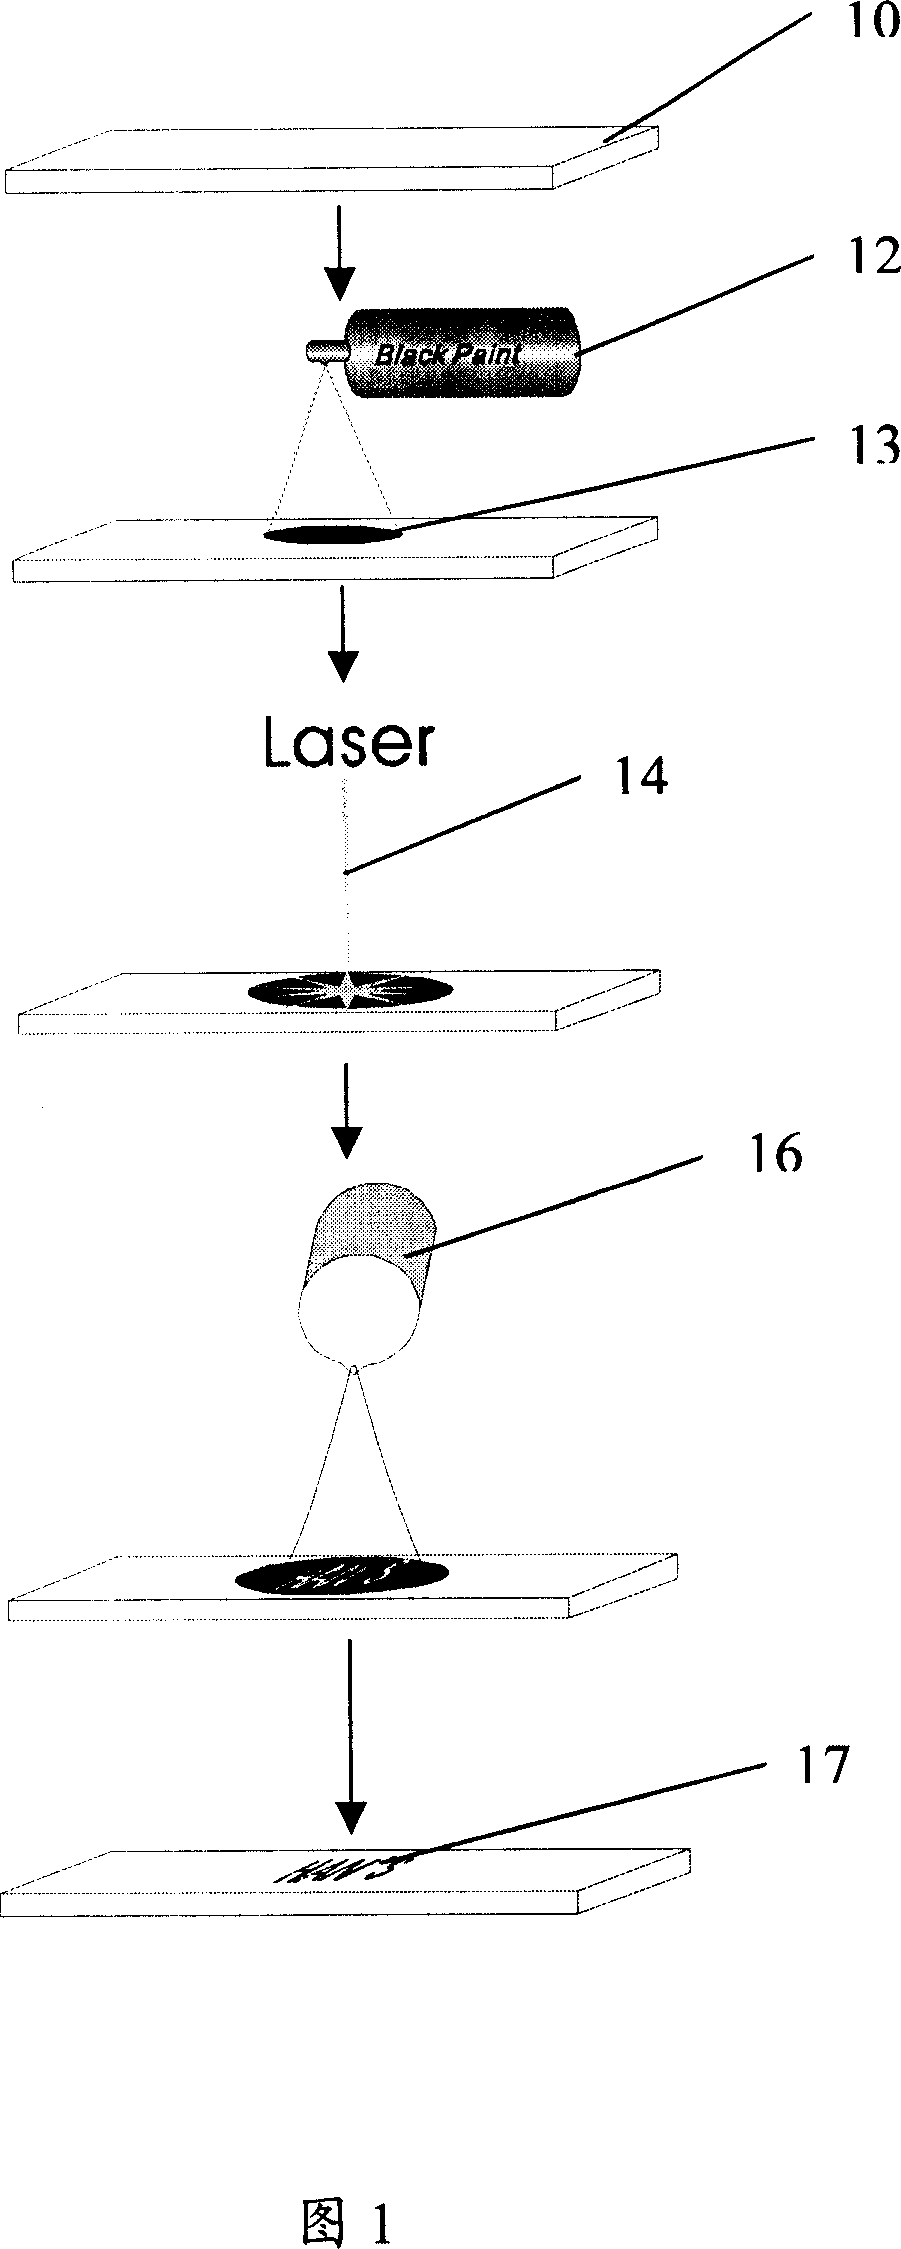 Method for marking on glass by YAG laser